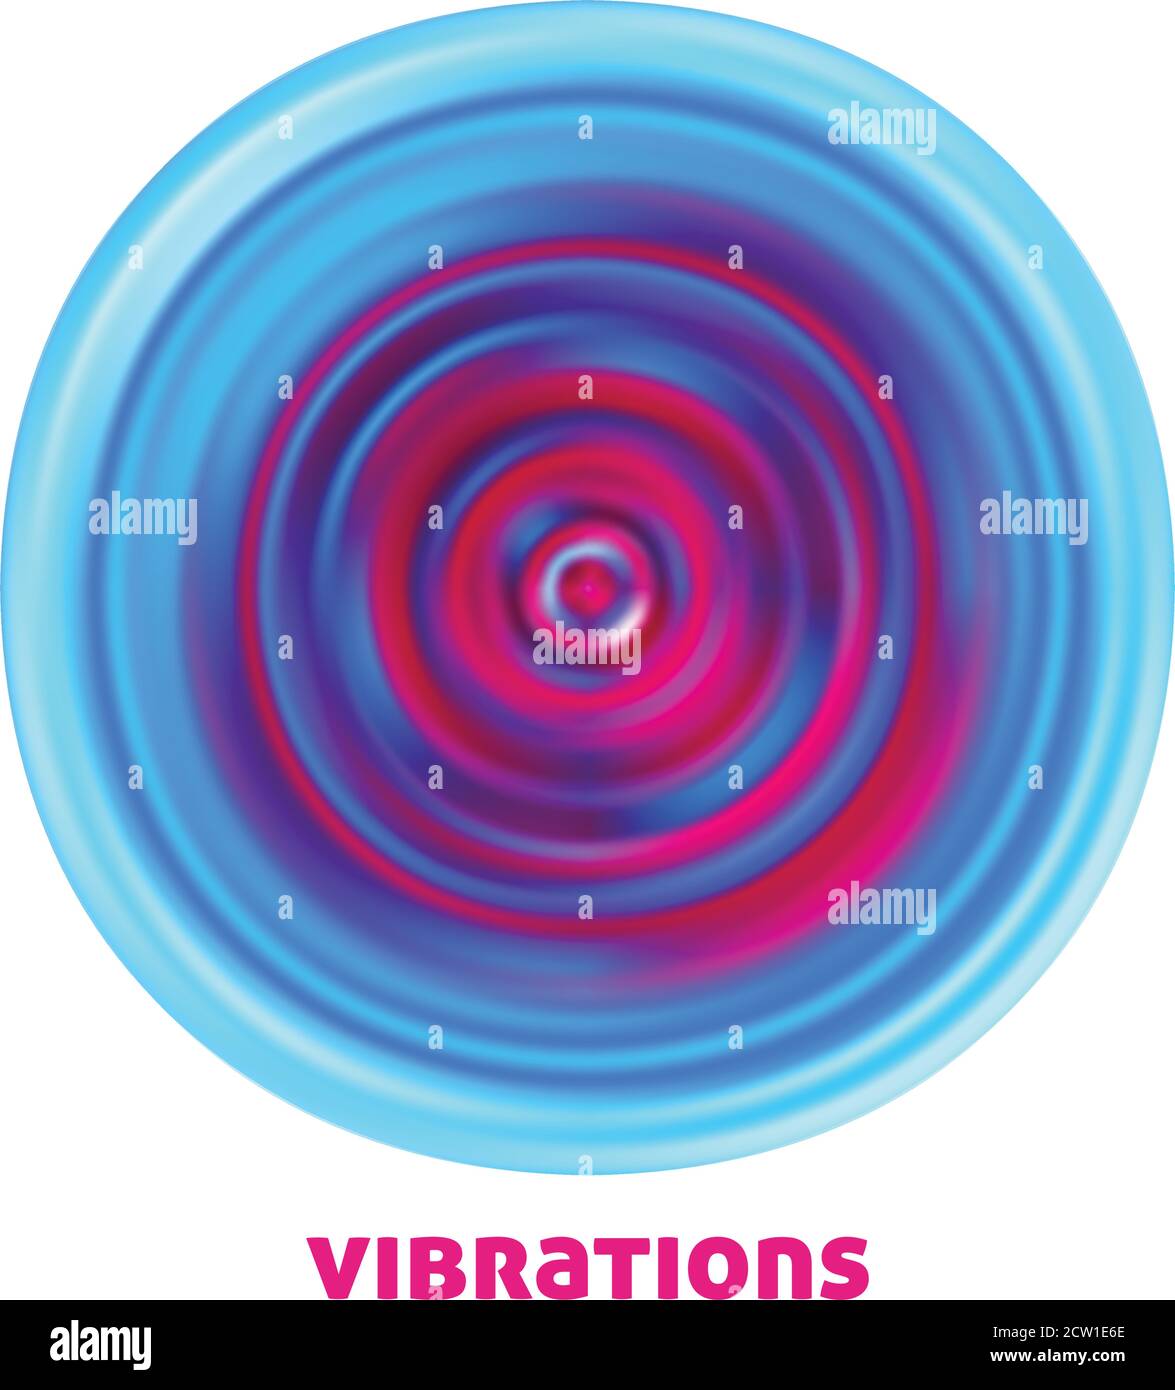 Visualization of high vibrations. Vibrating colorful circle isolated on white background. Vector graphics Stock Vector